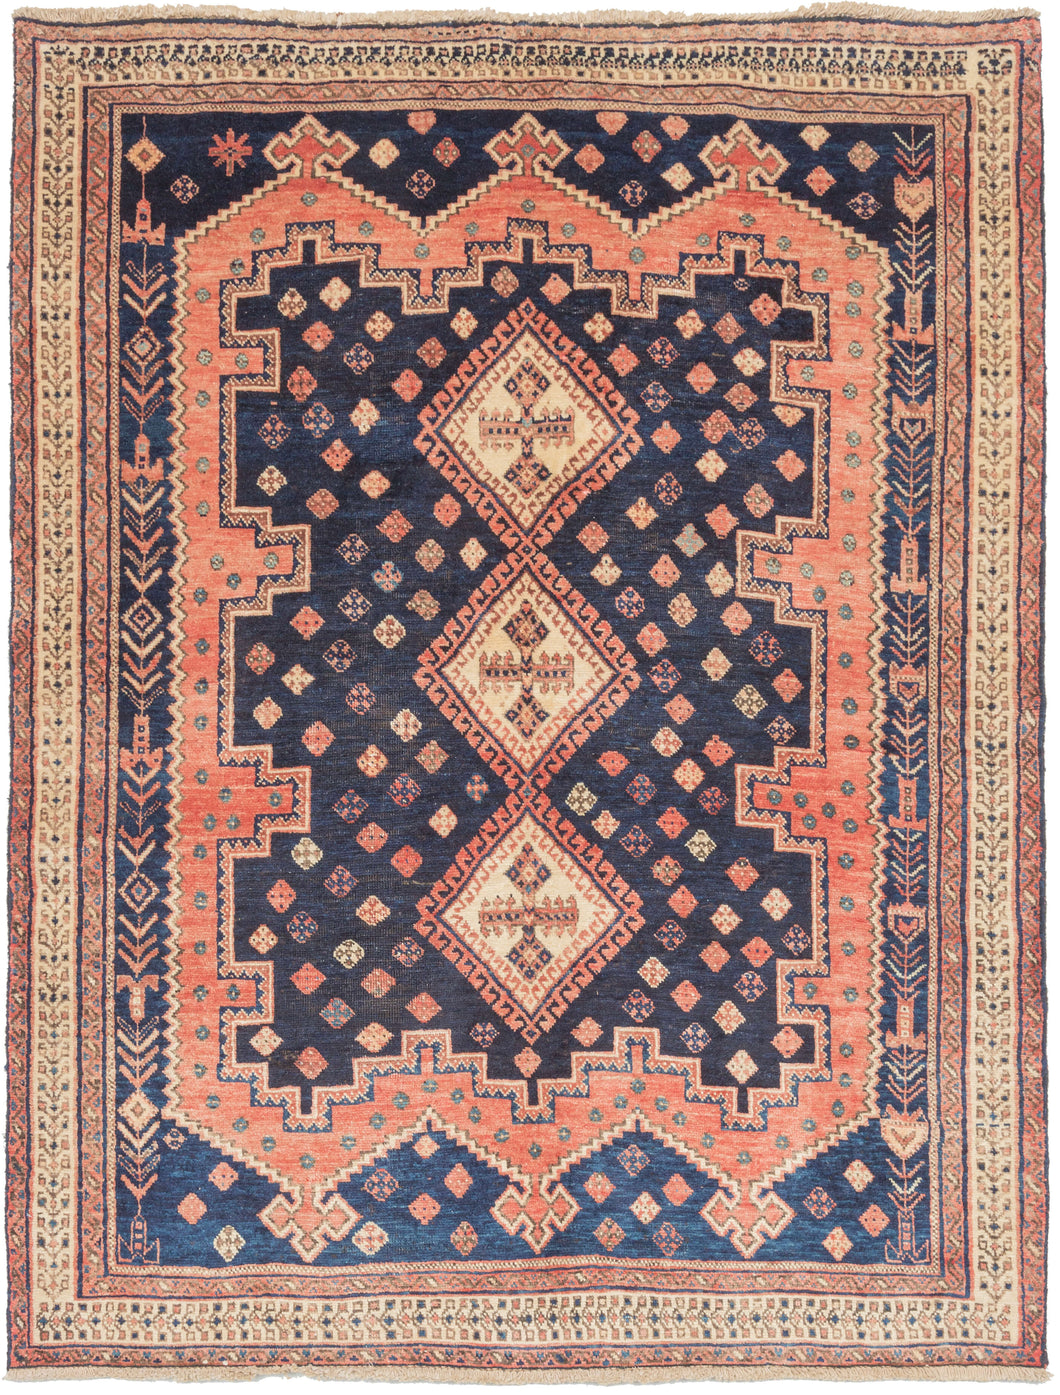 This Afshar rug was woven during the end of the 20th century.  It features classic patterning associated with the Afshar people of Sirjan. In the center are three small ivory medallions on a deep navy field surrounded by a glowing pink field which itself lays upon a final field of cobalt. The classic palette of reds and blues is rendered in a softer more pastel variant here. Small symbols and figures fill the negative space, making this a very visually interesting rug.